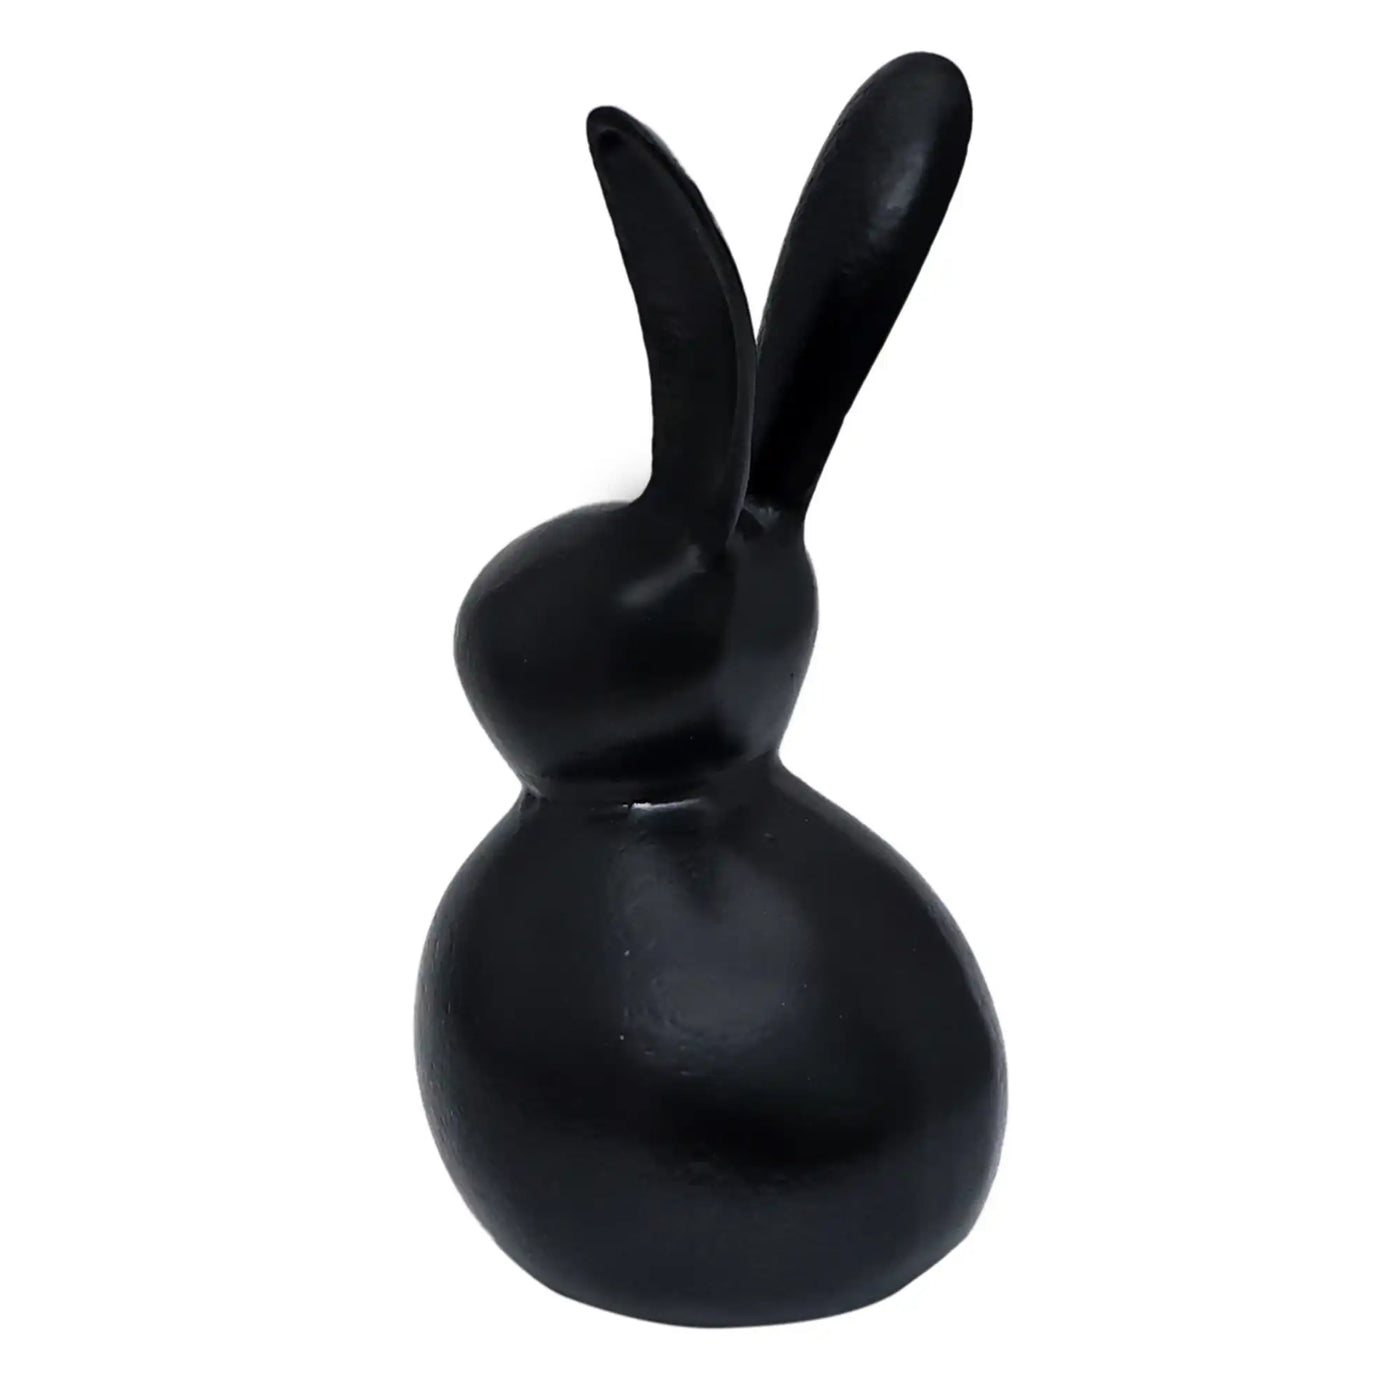 Abstract Hare Sculpture 74-160-23